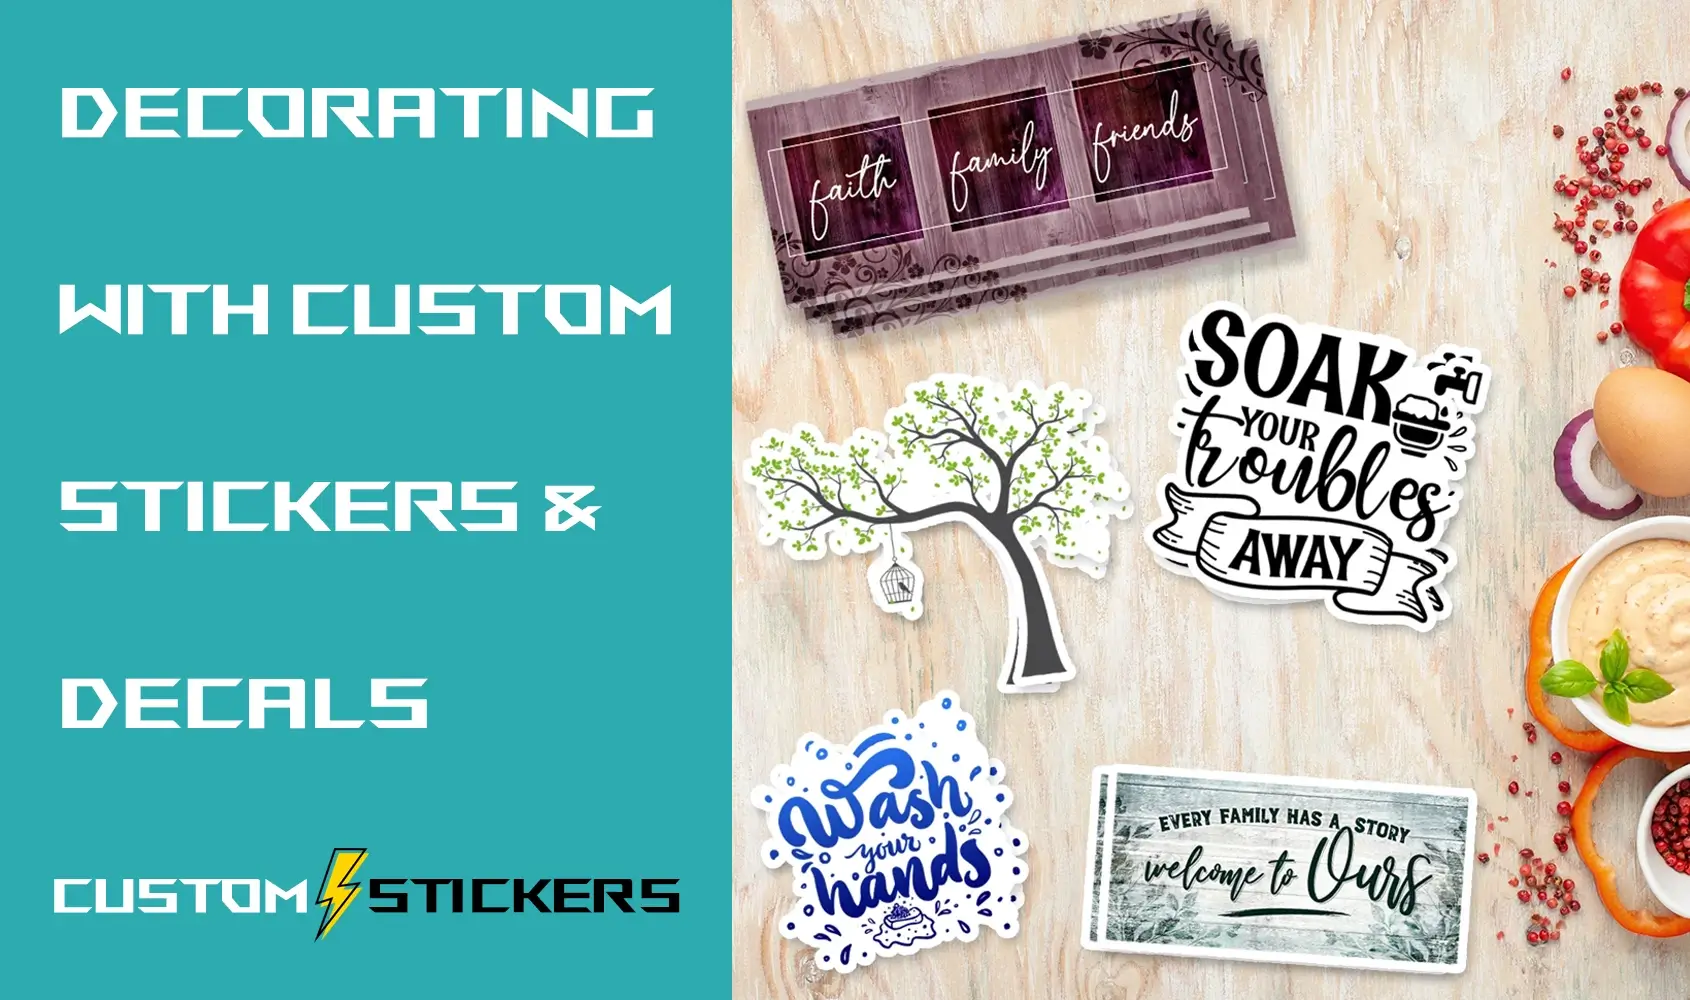 Decorating with Stickers and Decals